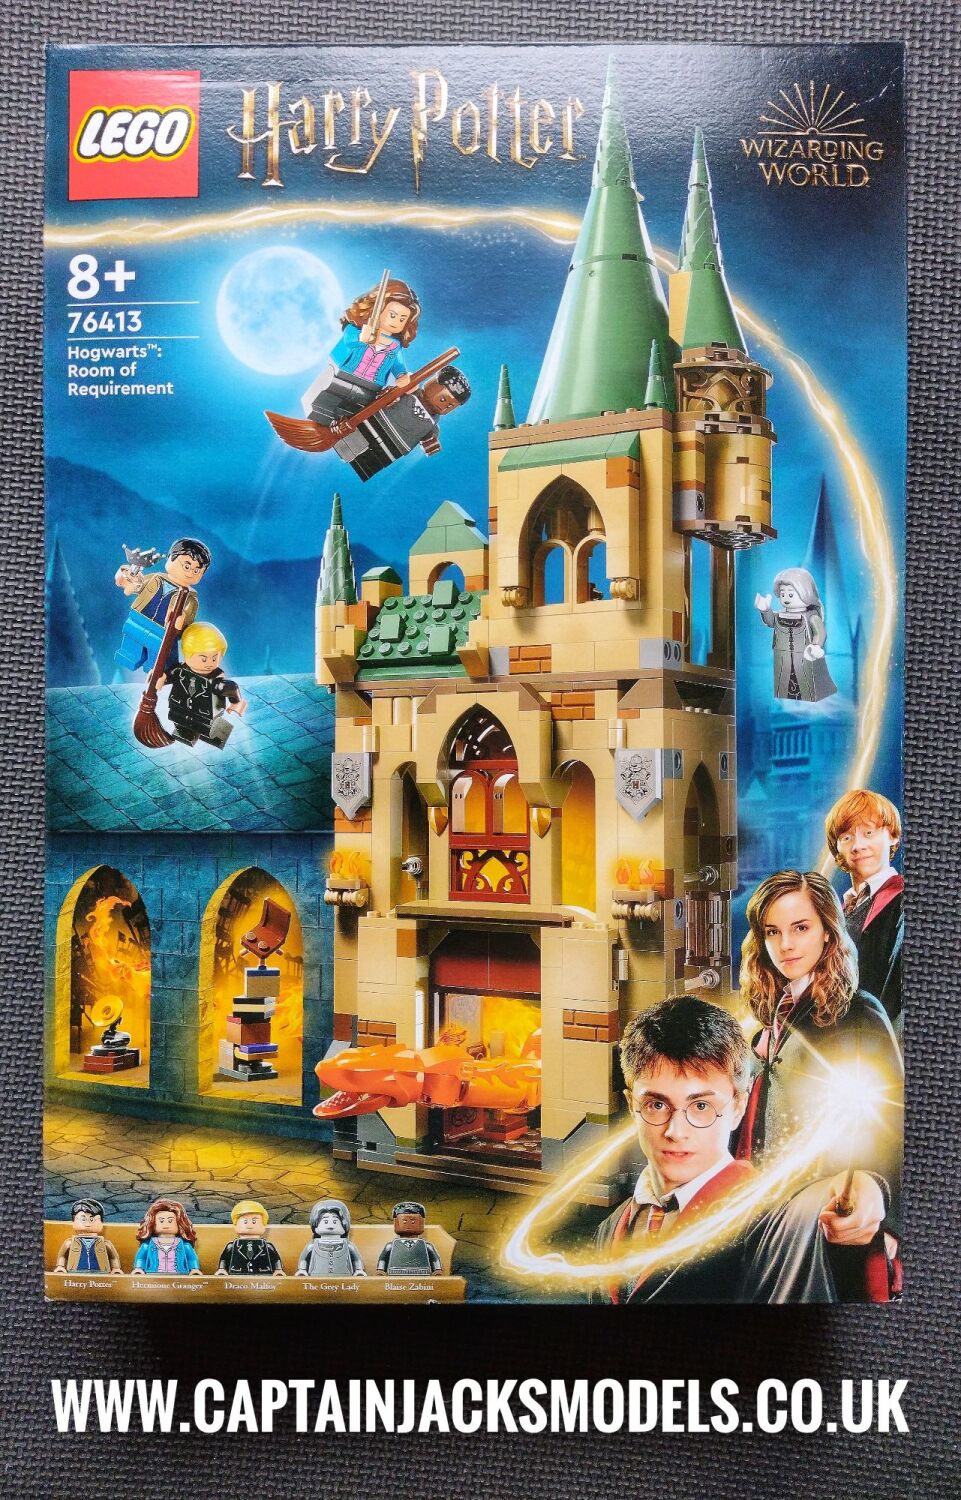 Lego Harry Potter 76413 - Wizarding World - Hogwarts Room Of Requirement - 